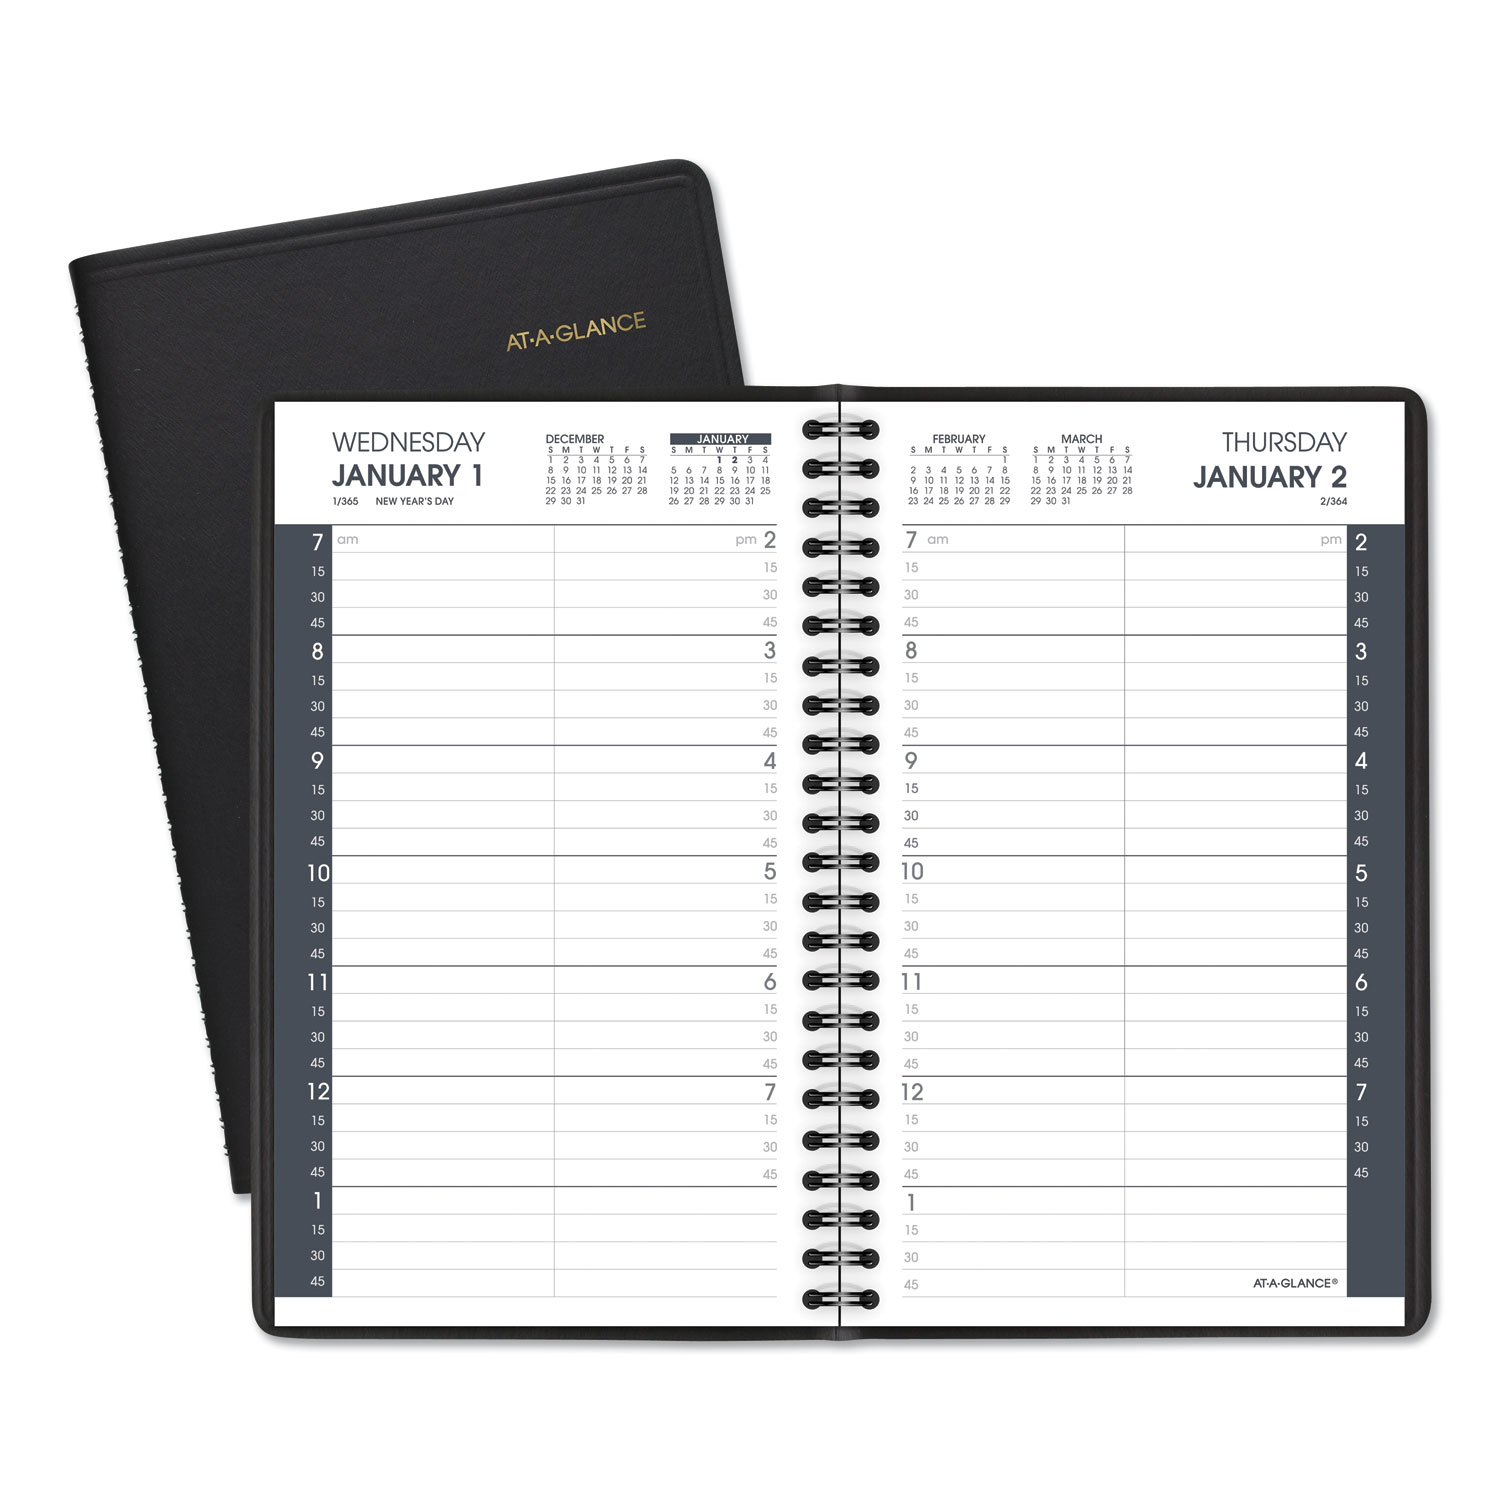 Daily Appointment Book with 15-Minute Appointments, 8 x 4 7/8, Black, 2020